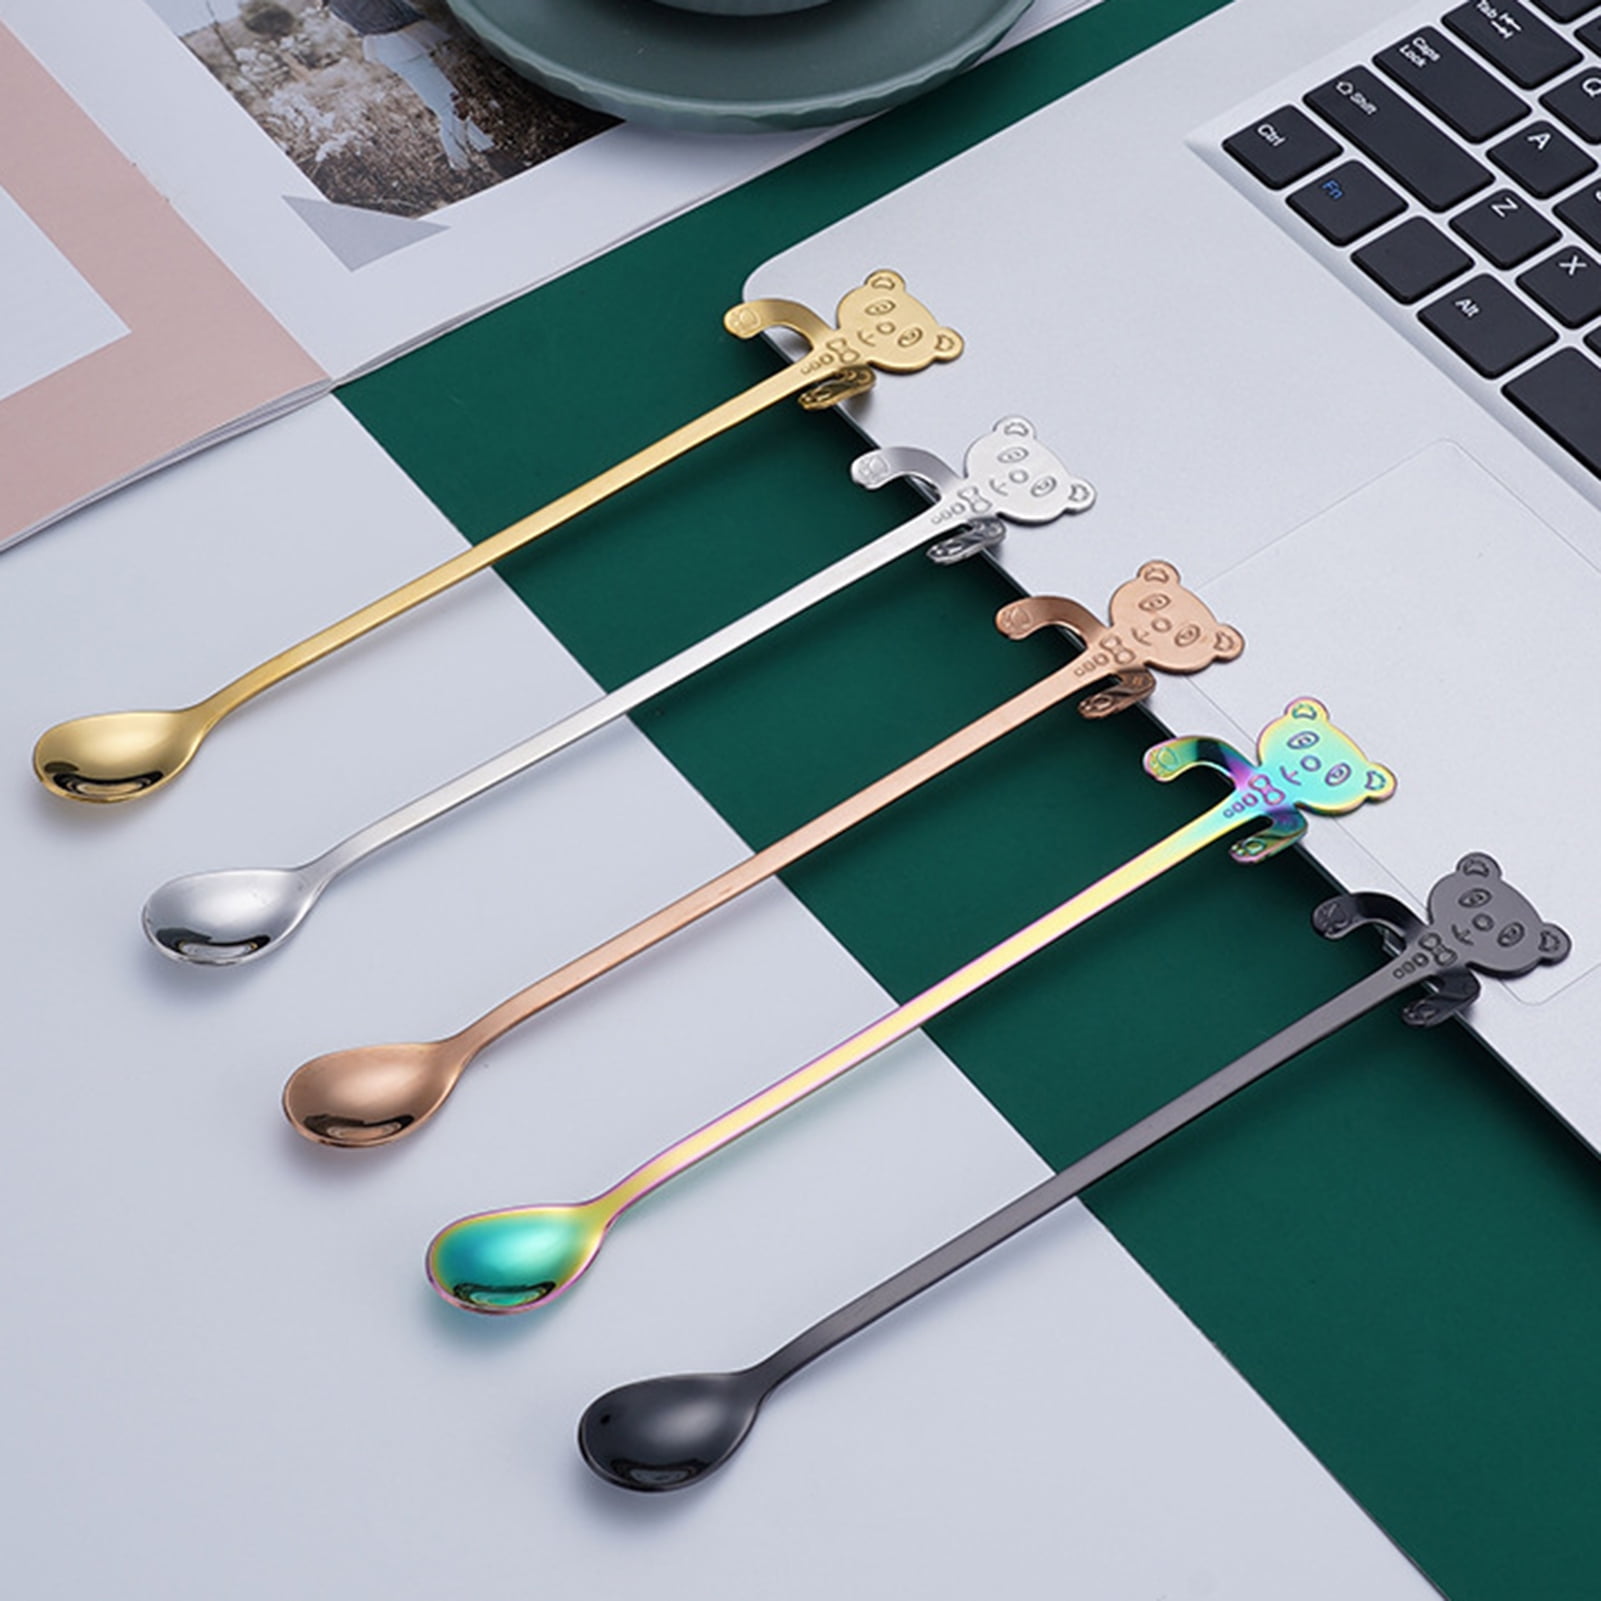 304 7PCS Rose Gold 18/8 Kitchen Utensil Set Wide Spatula,Soup Ladle,Strainer Ladle,Slotted Spatula,Spaghetti Server,Rice Scoop Spoon and Whisk Stainless Steel 